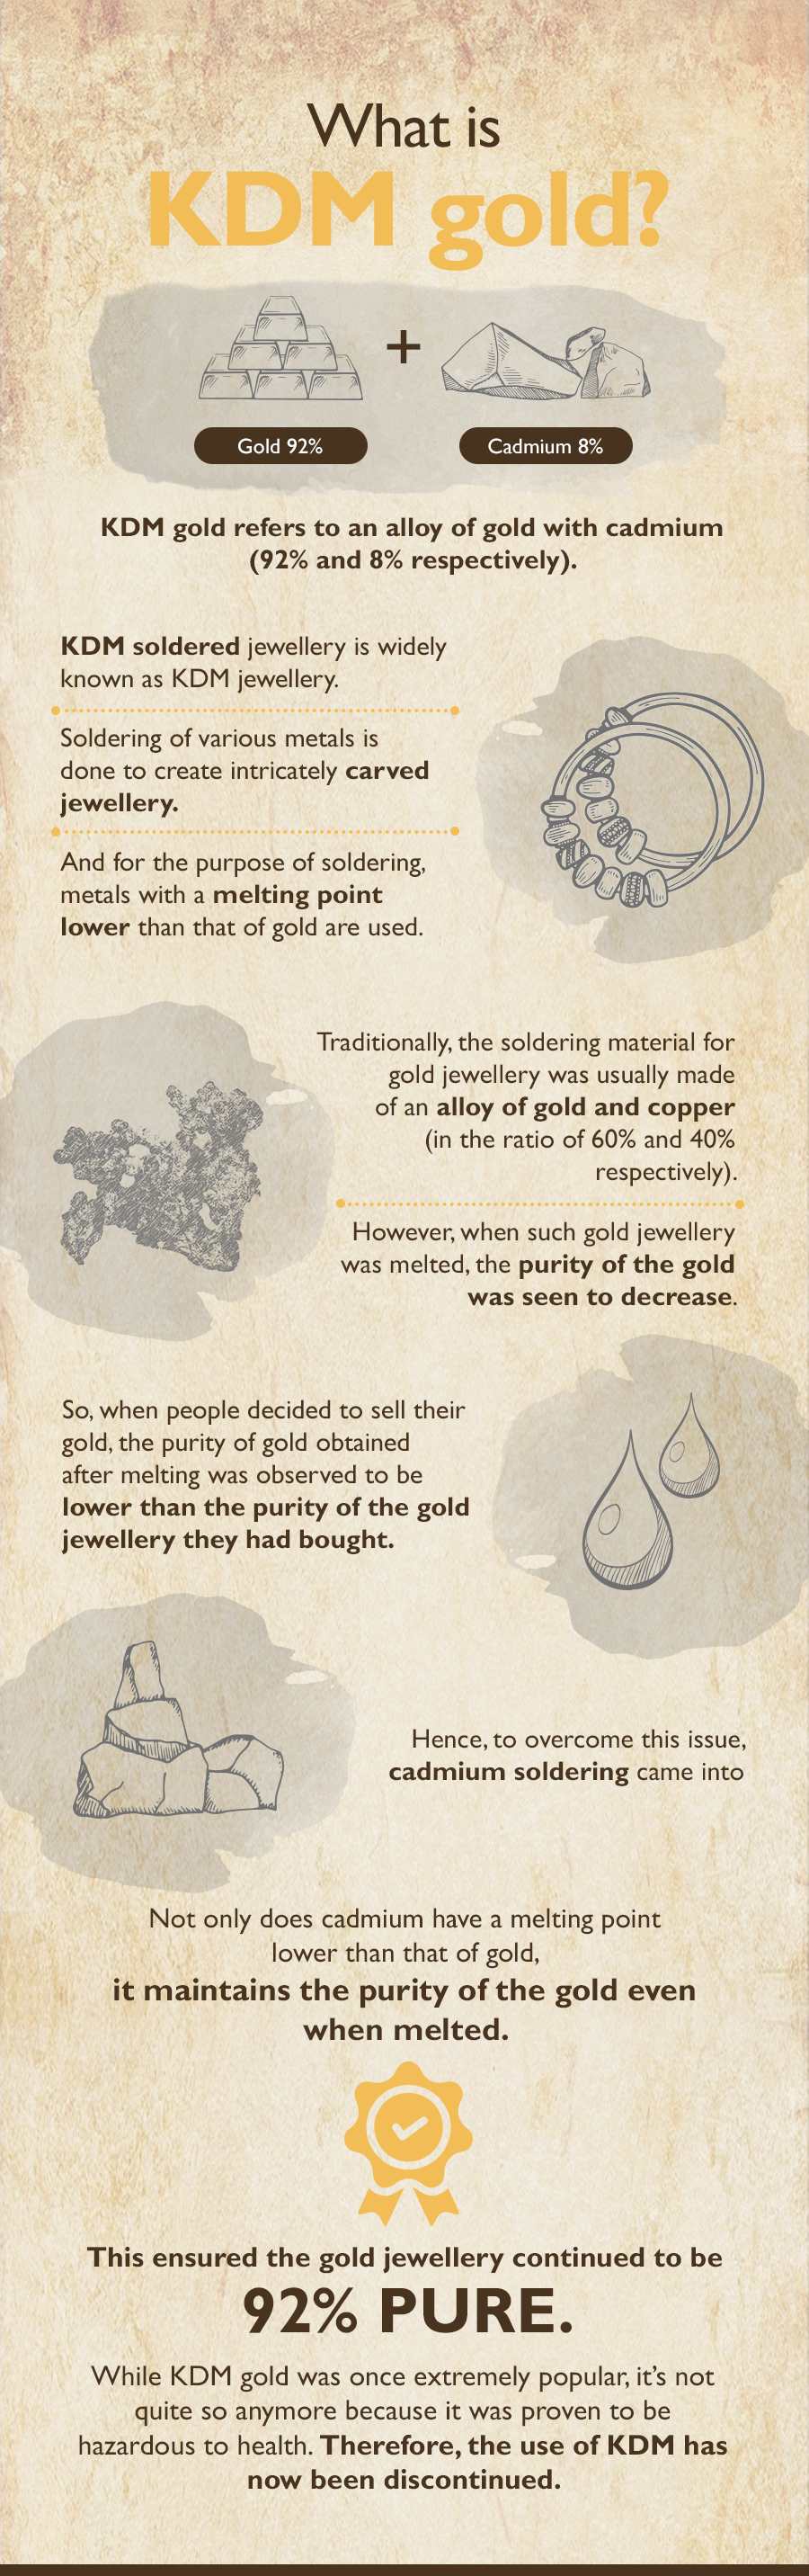 What is KDM gold?